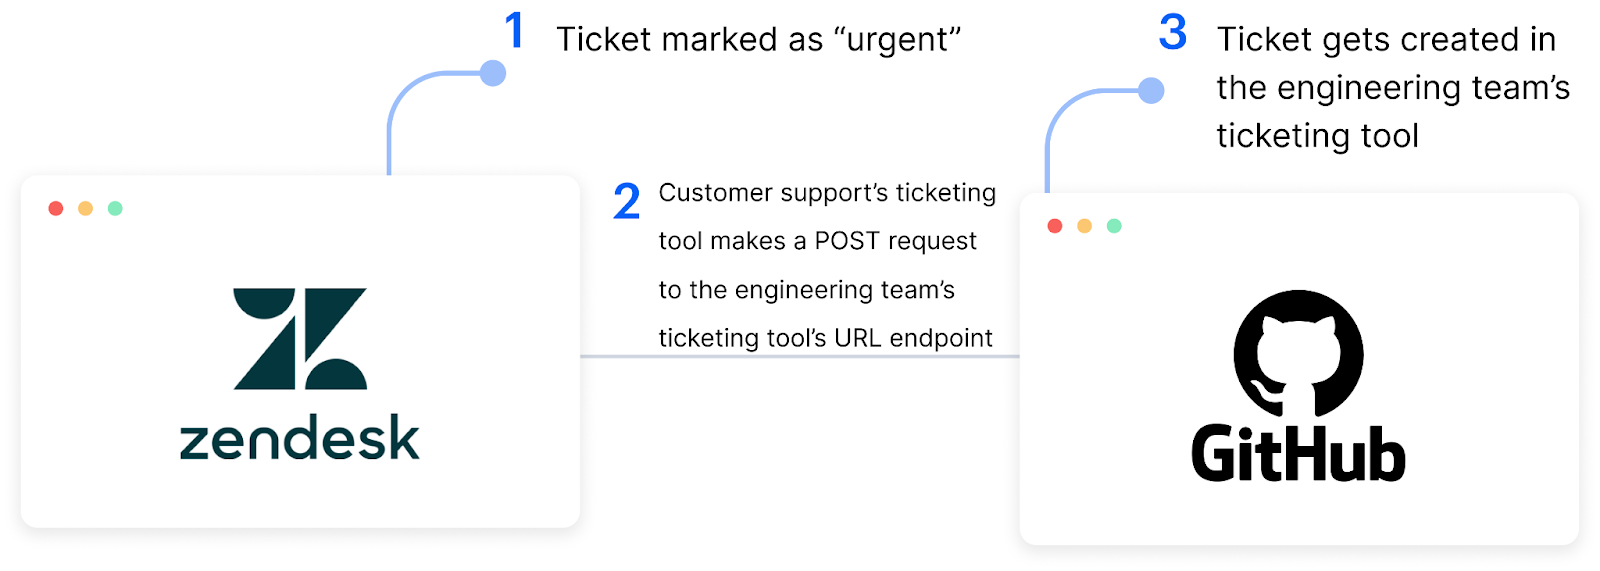 Webhook events example for escalating tickets